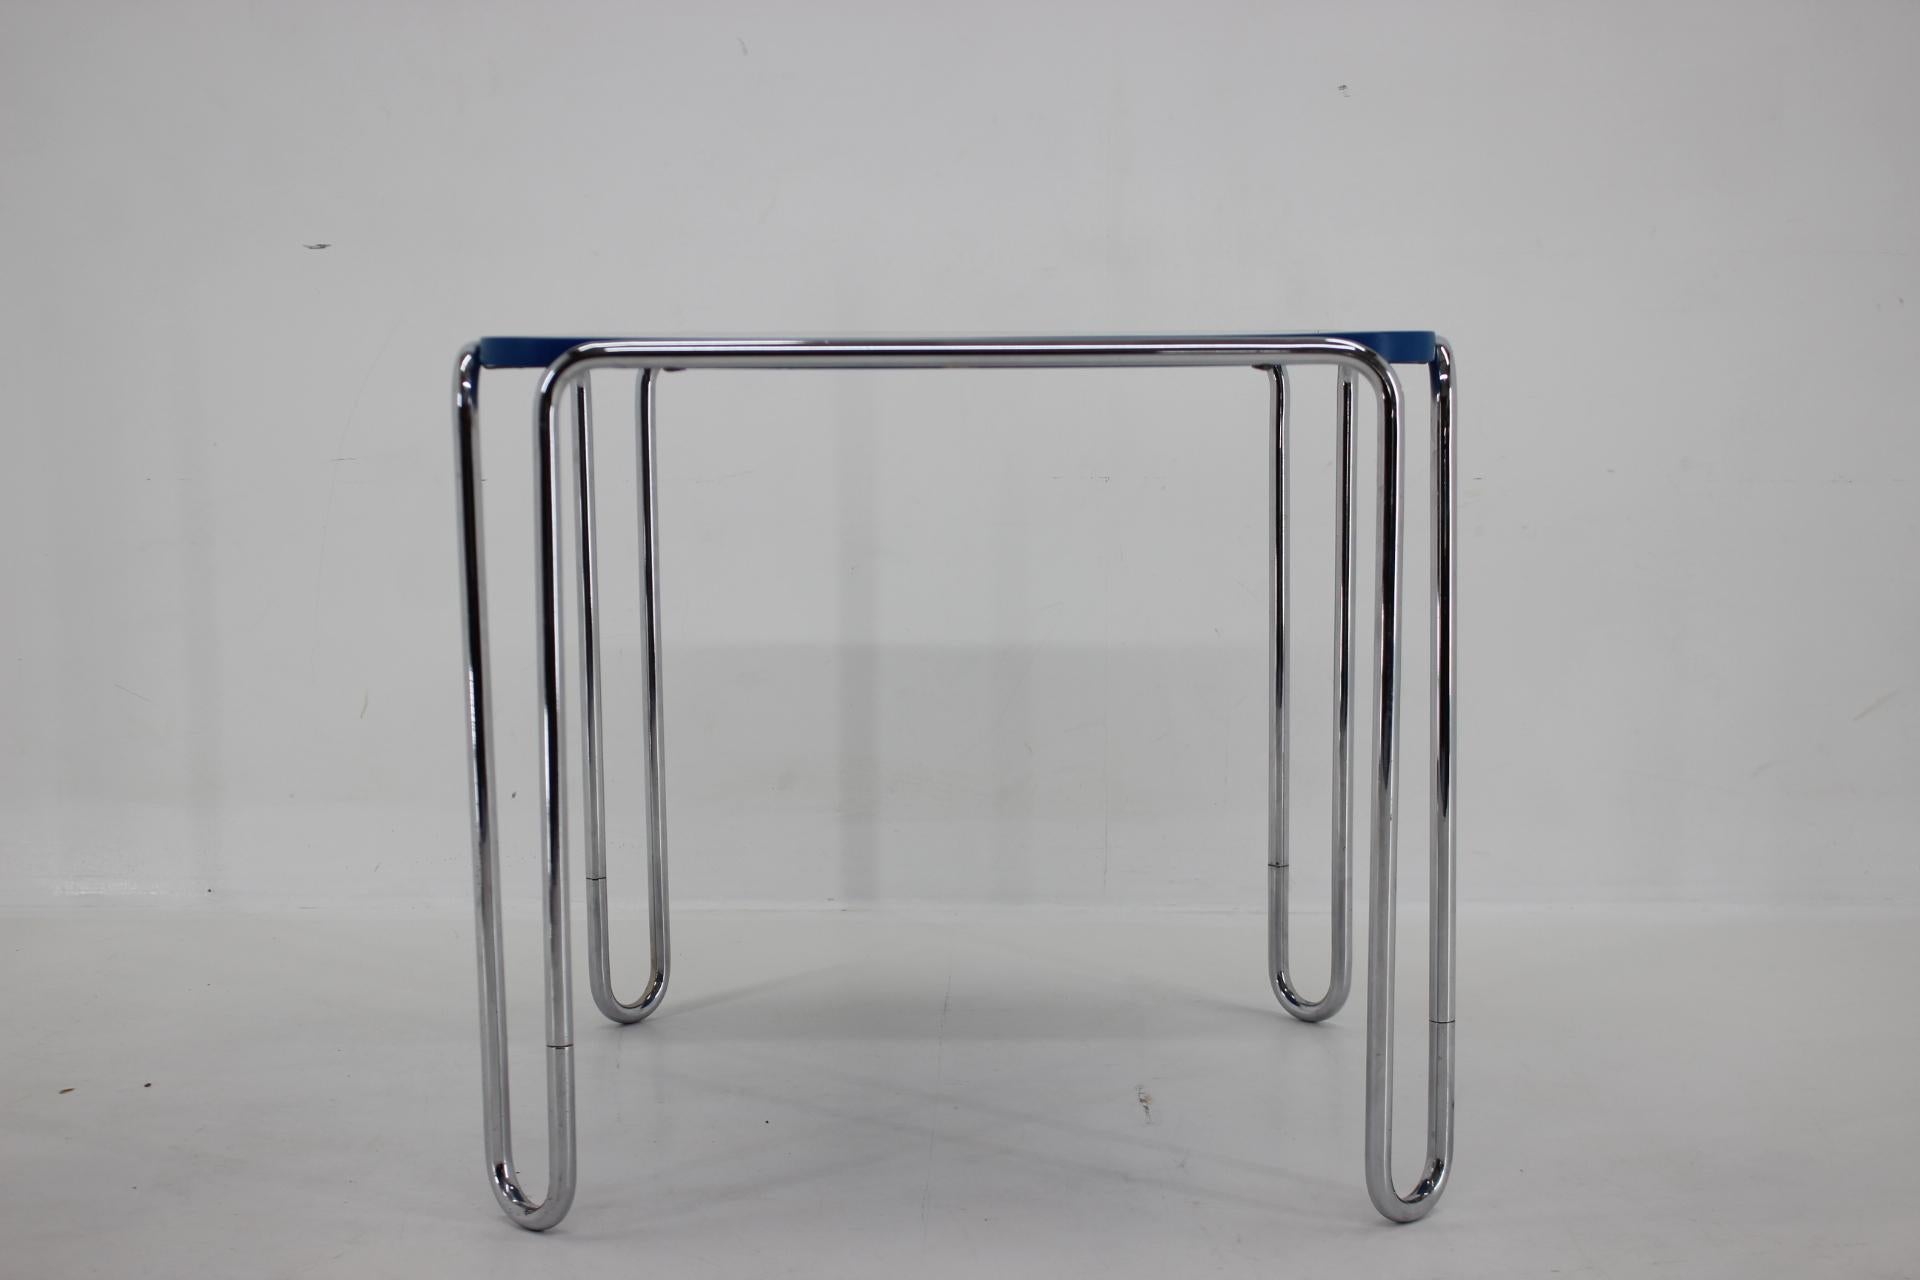 - Chrome plated parts in good condition with some signs of use.
- Top desk has been relacquered some times ago and its in good condition.